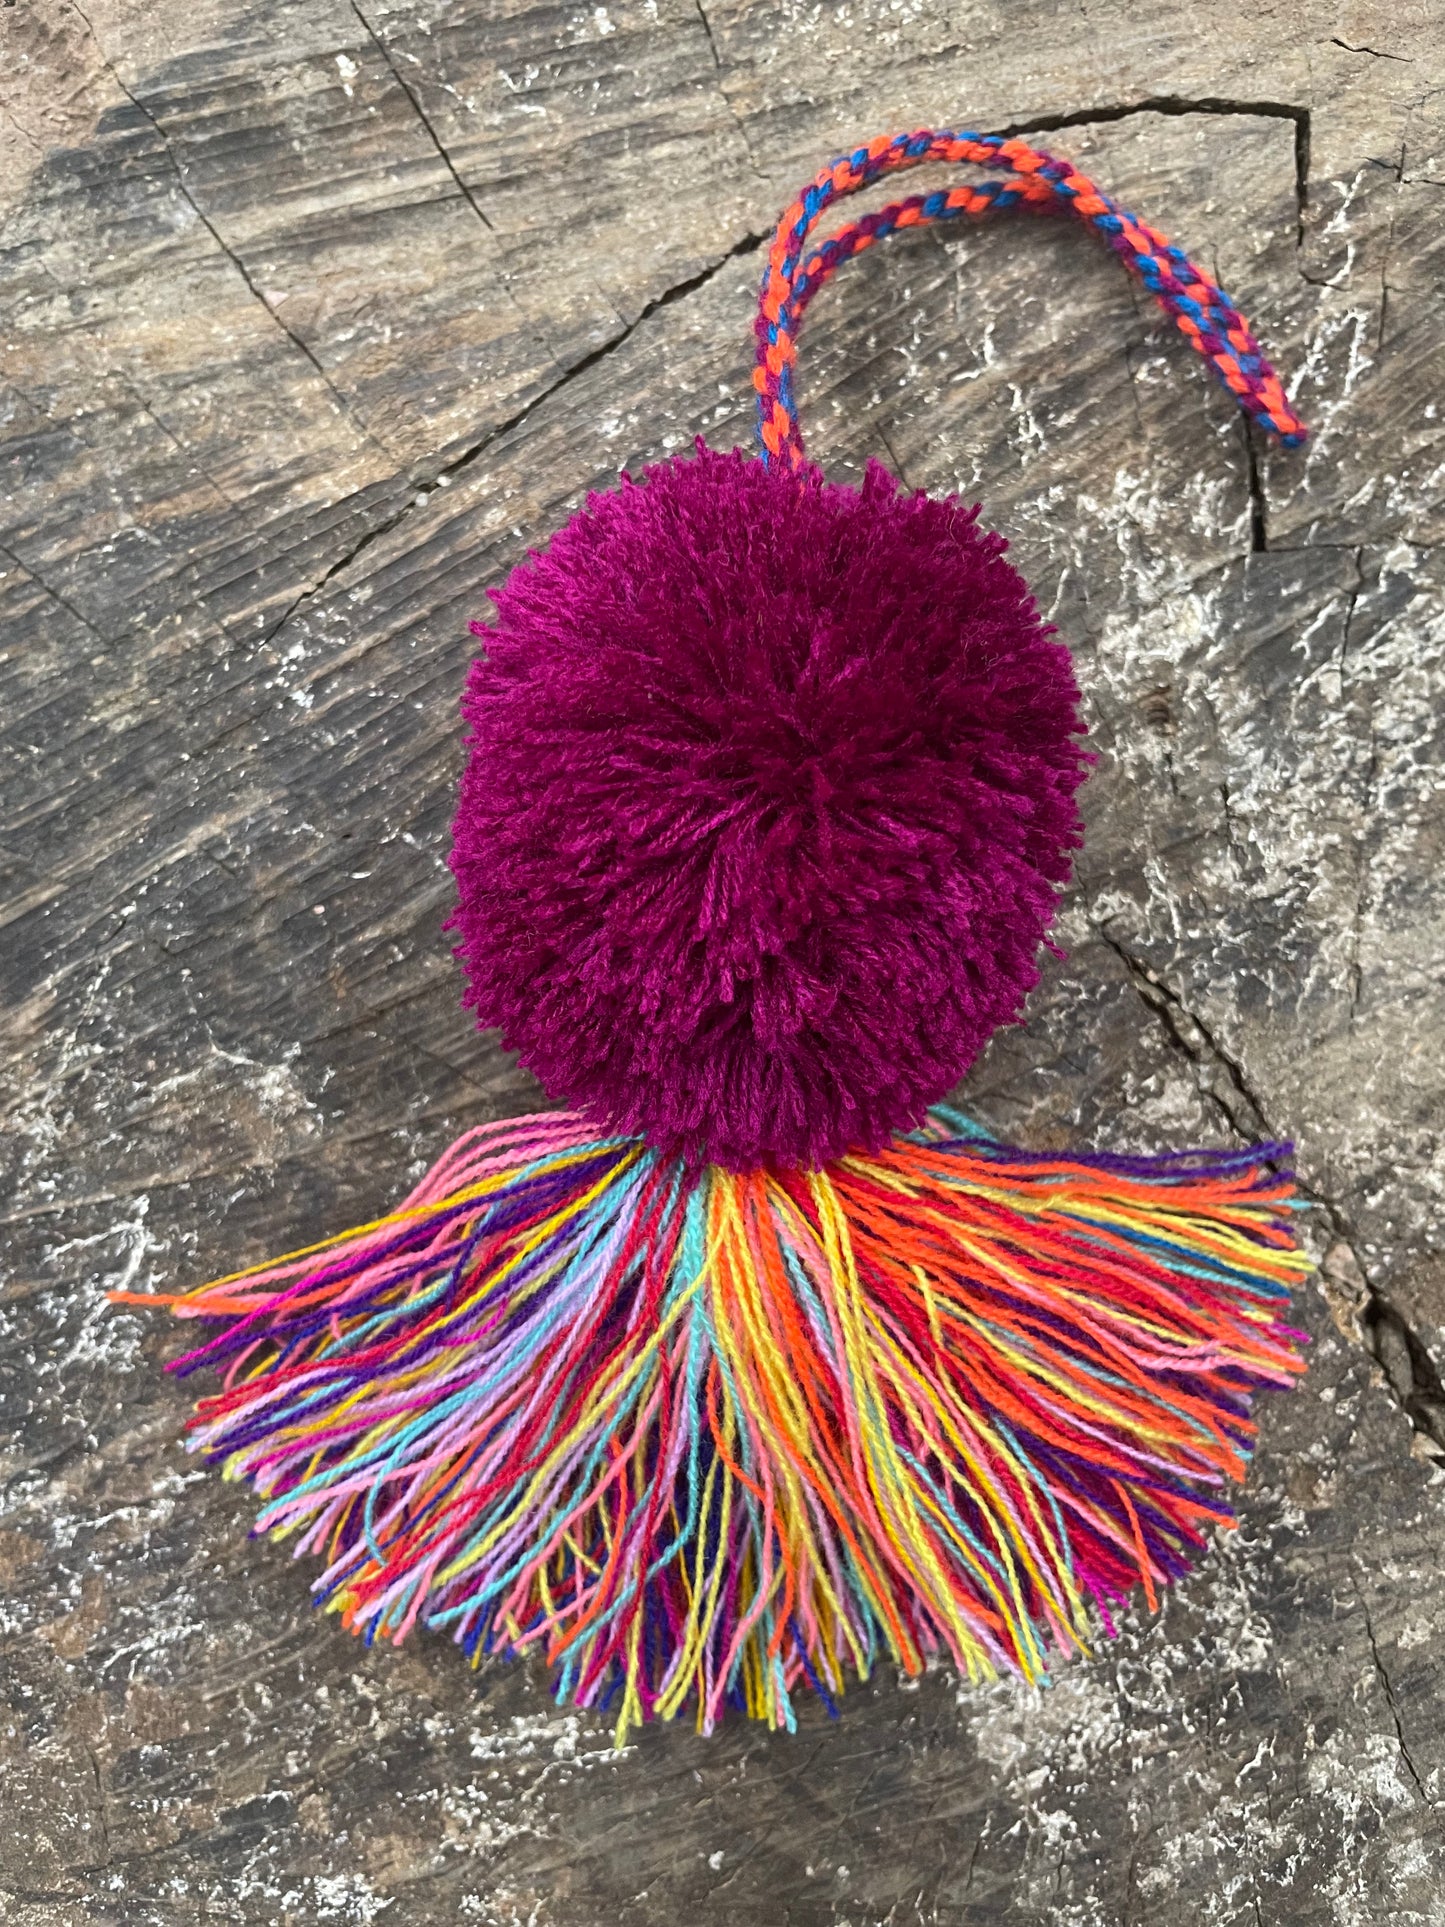 Guatemalan Pom-poms with colorful tassels/Charms